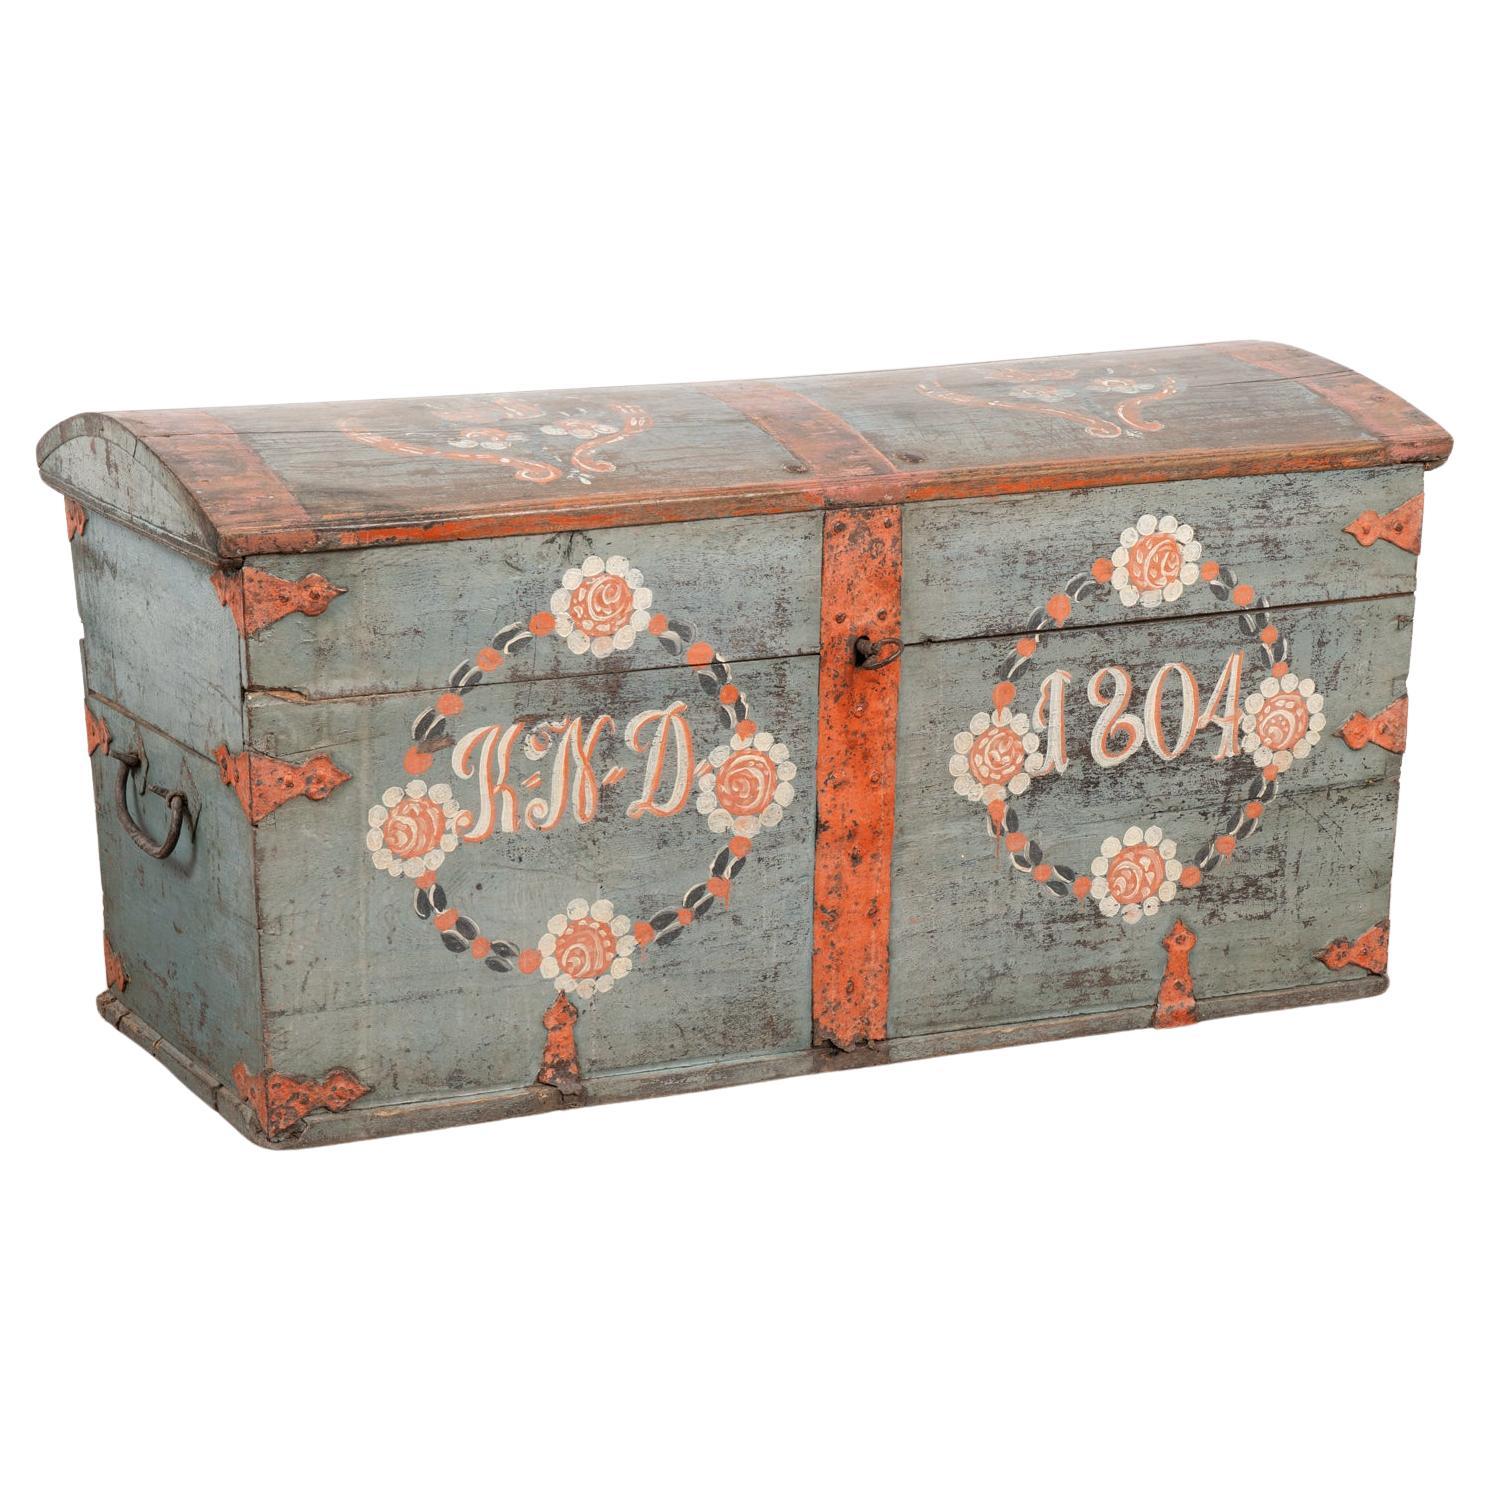 Original Blue Painted Dome Top Trunk from Sweden dated 1804